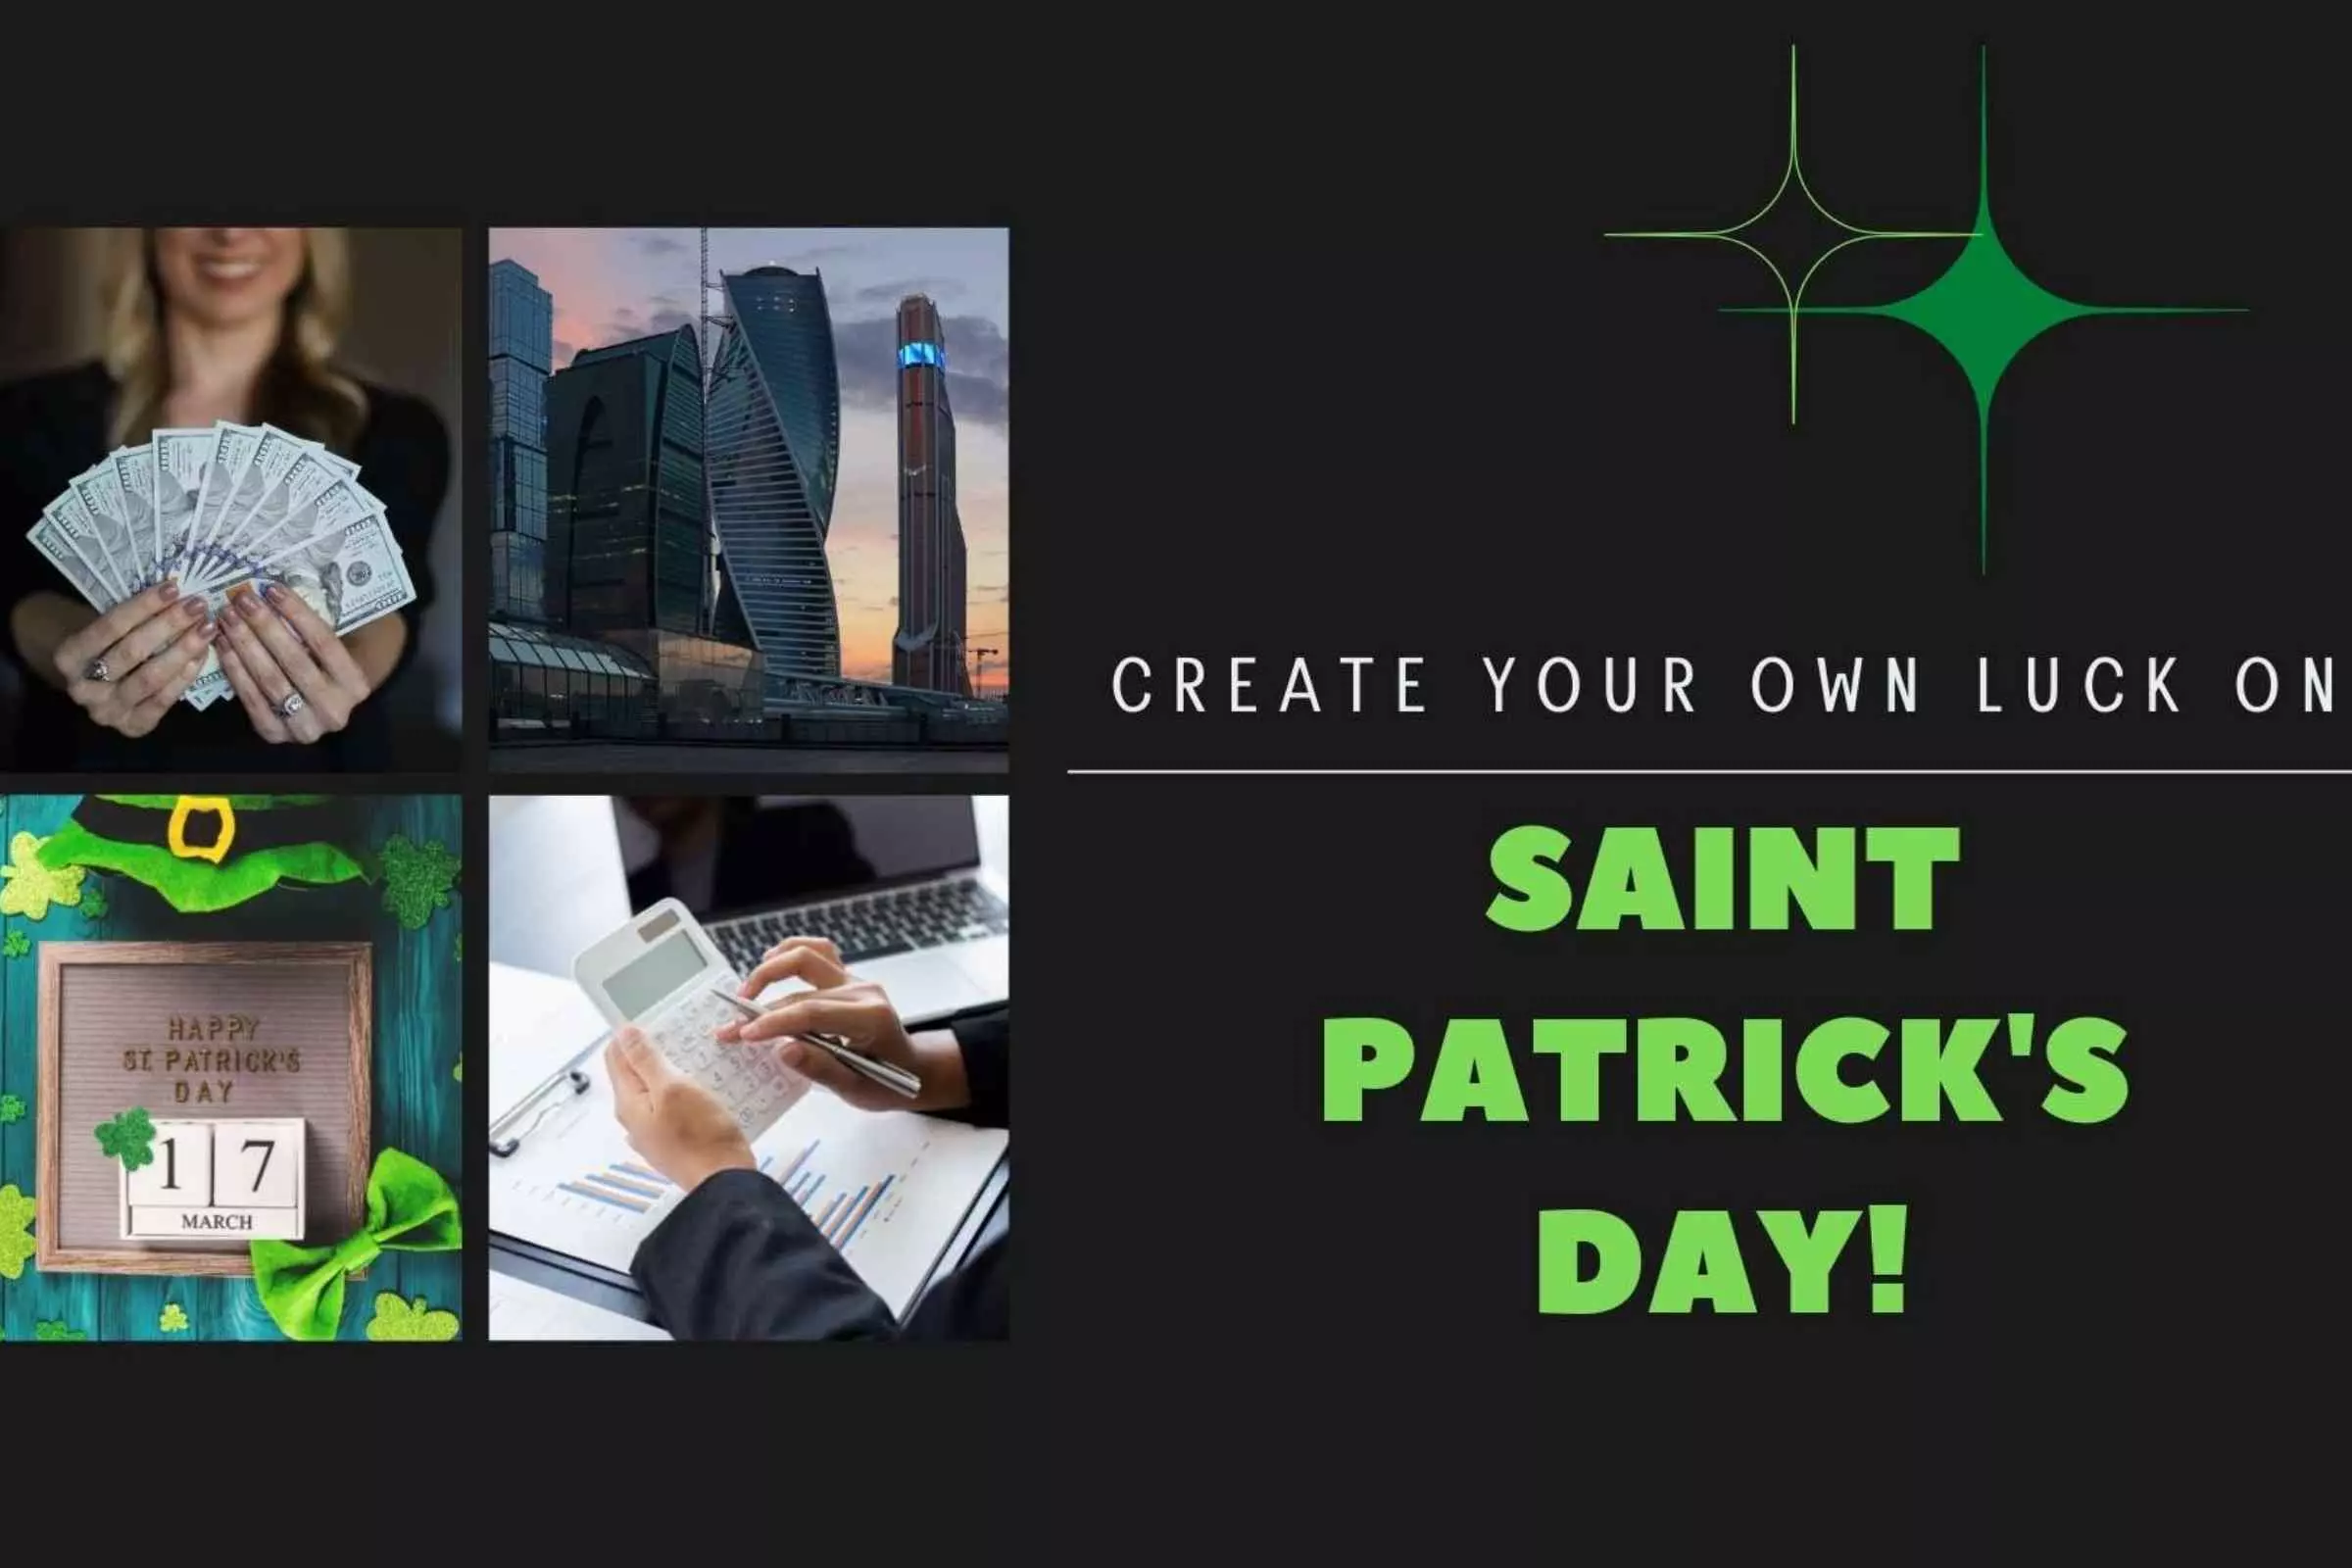 Create Your Own St. Patrick’s Day Luck